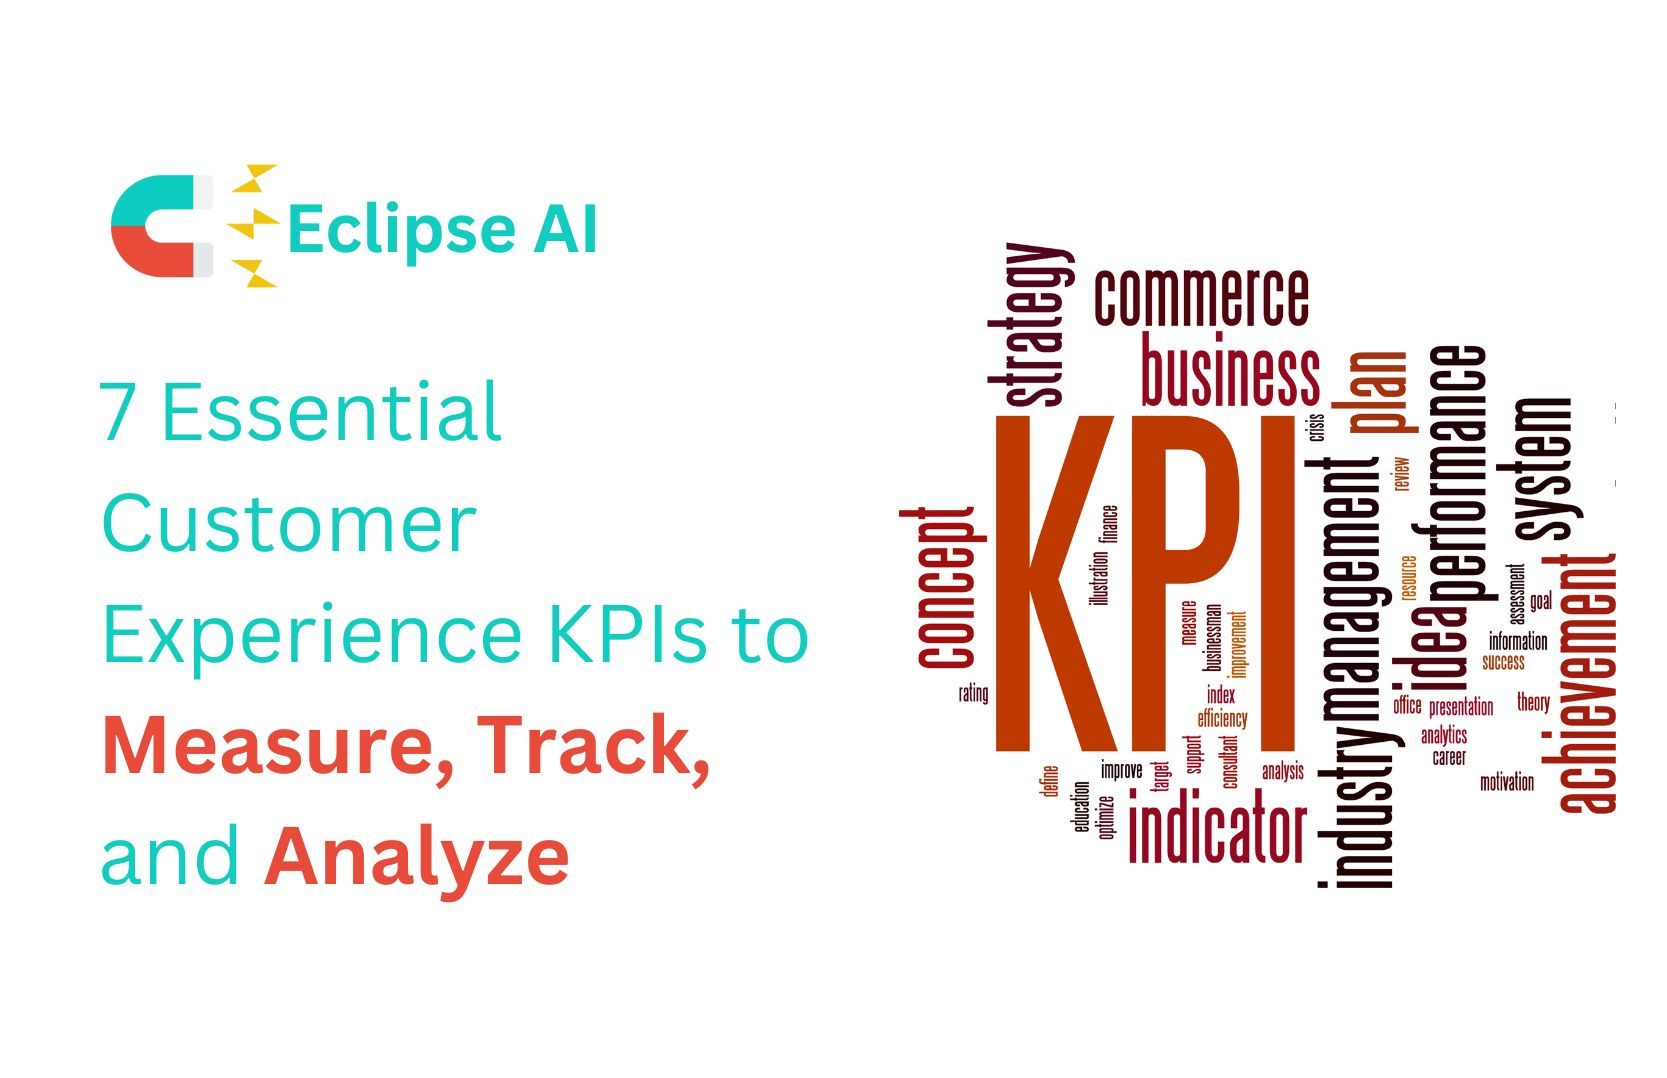 7 Essential Customer Experience KPIs to Measure, Track, and Analyze